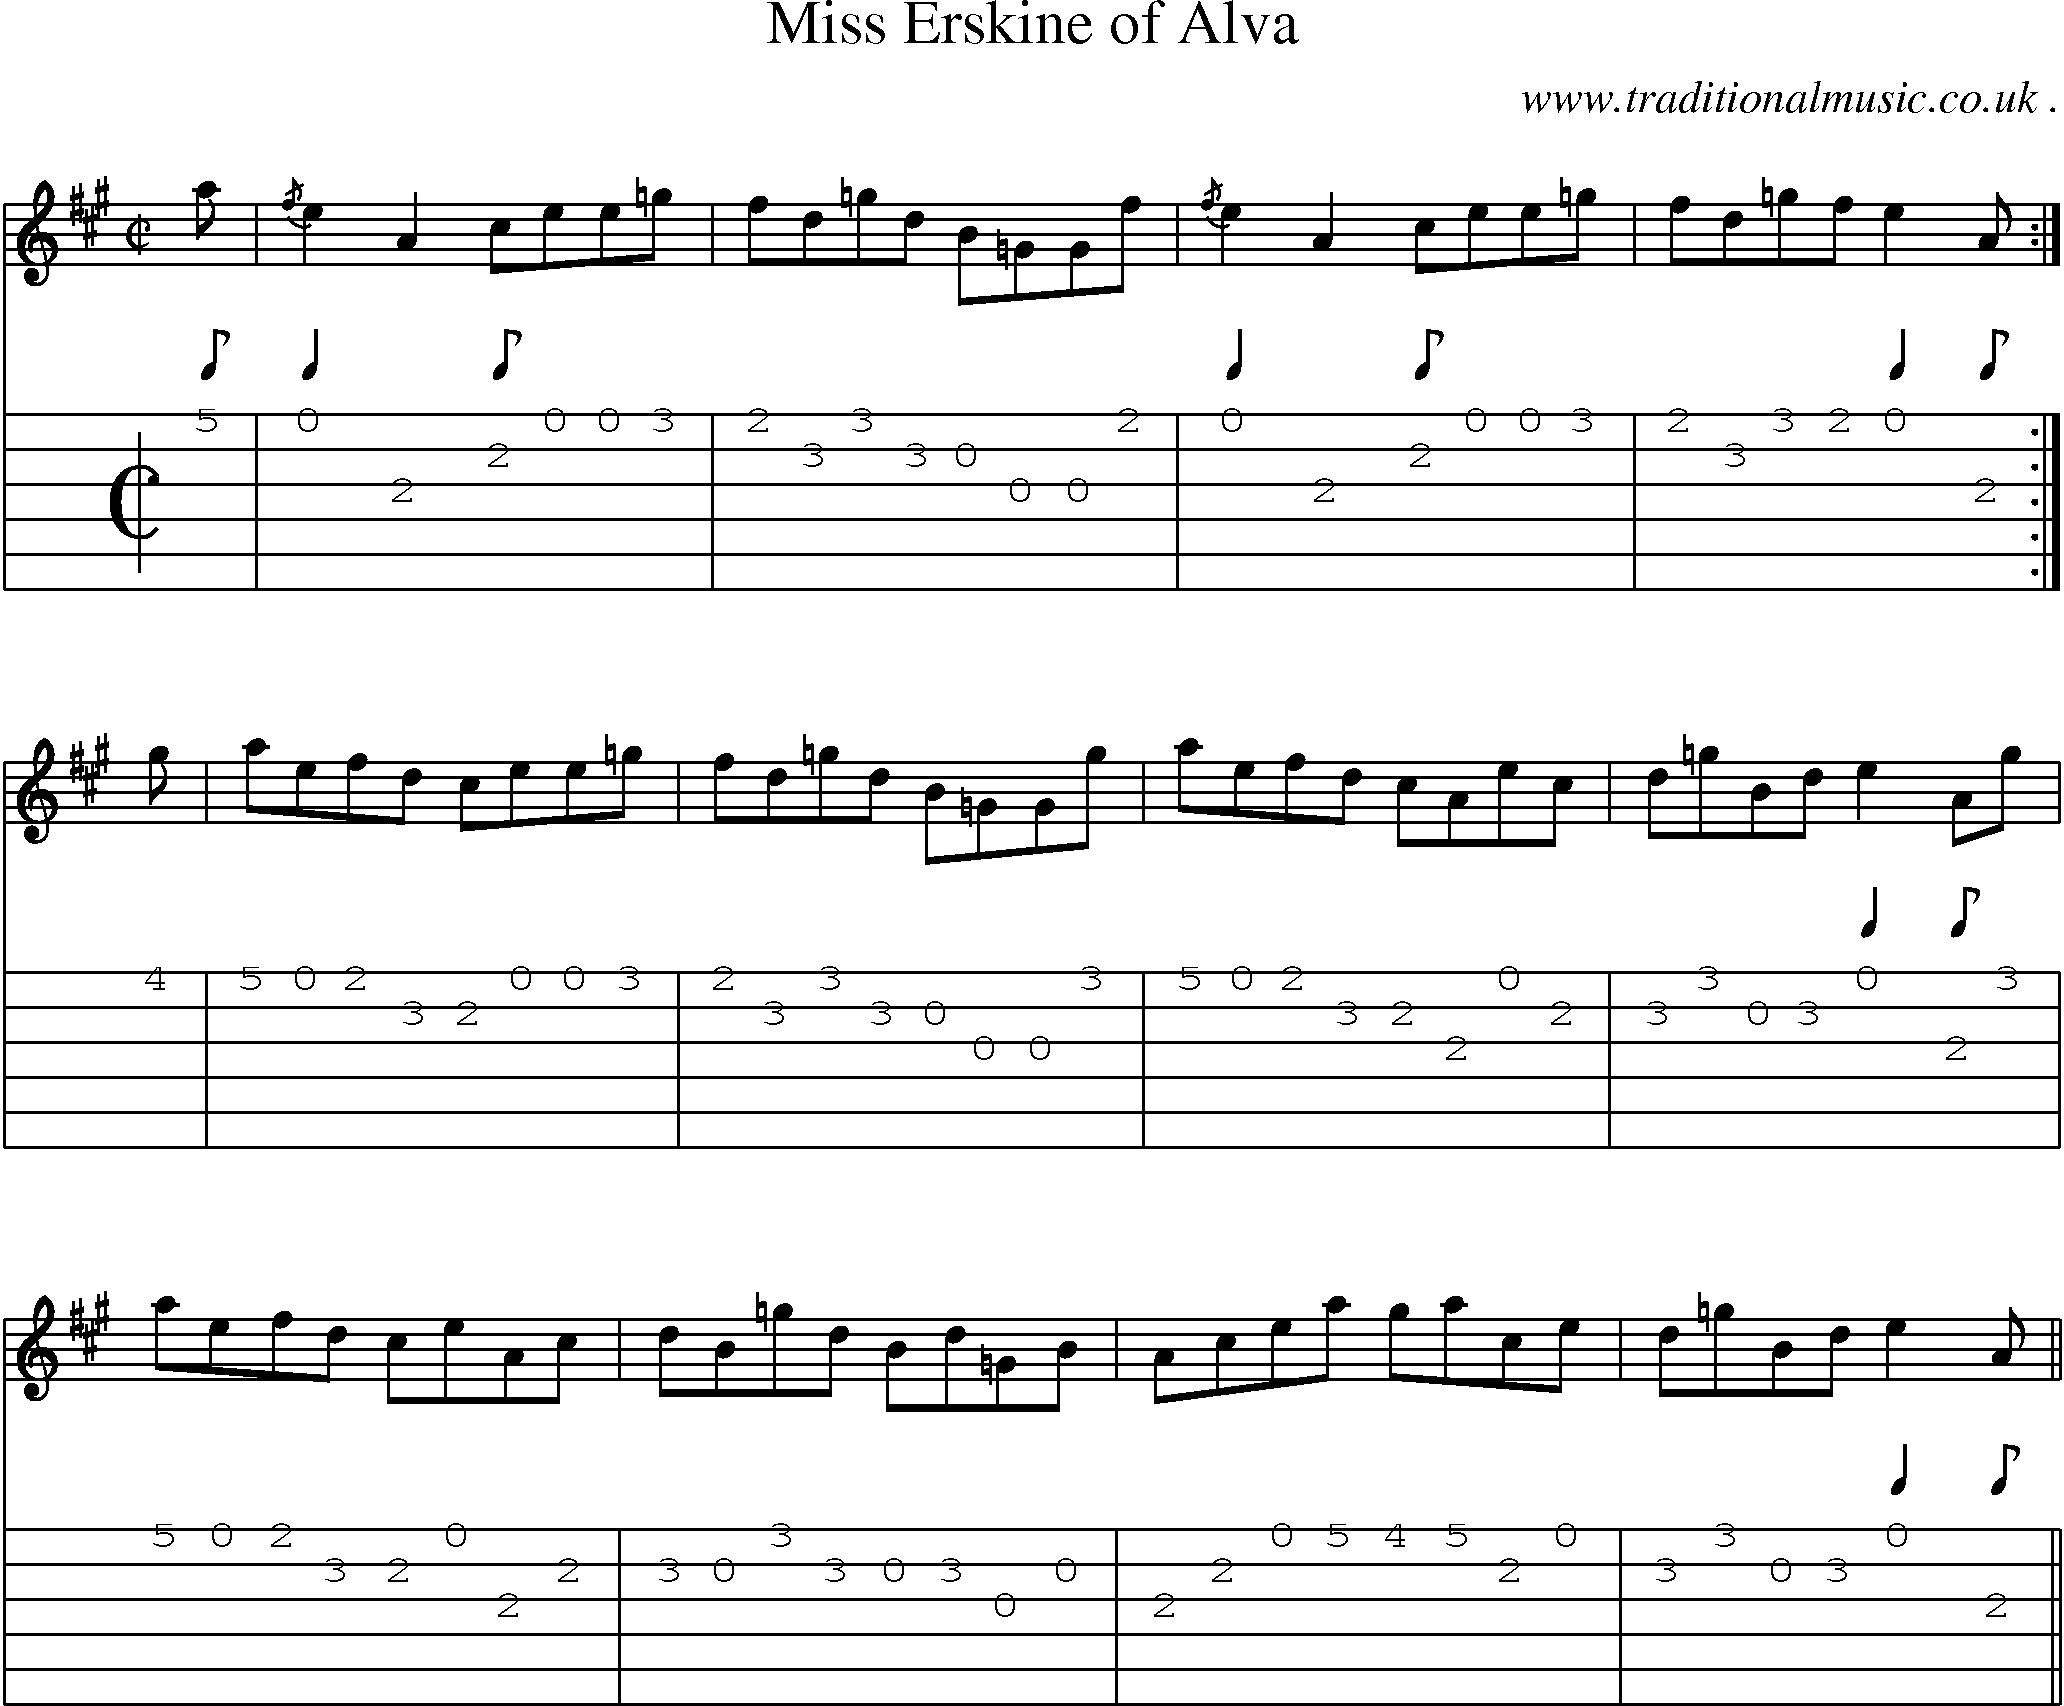 Sheet-music  score, Chords and Guitar Tabs for Miss Erskine Of Alva